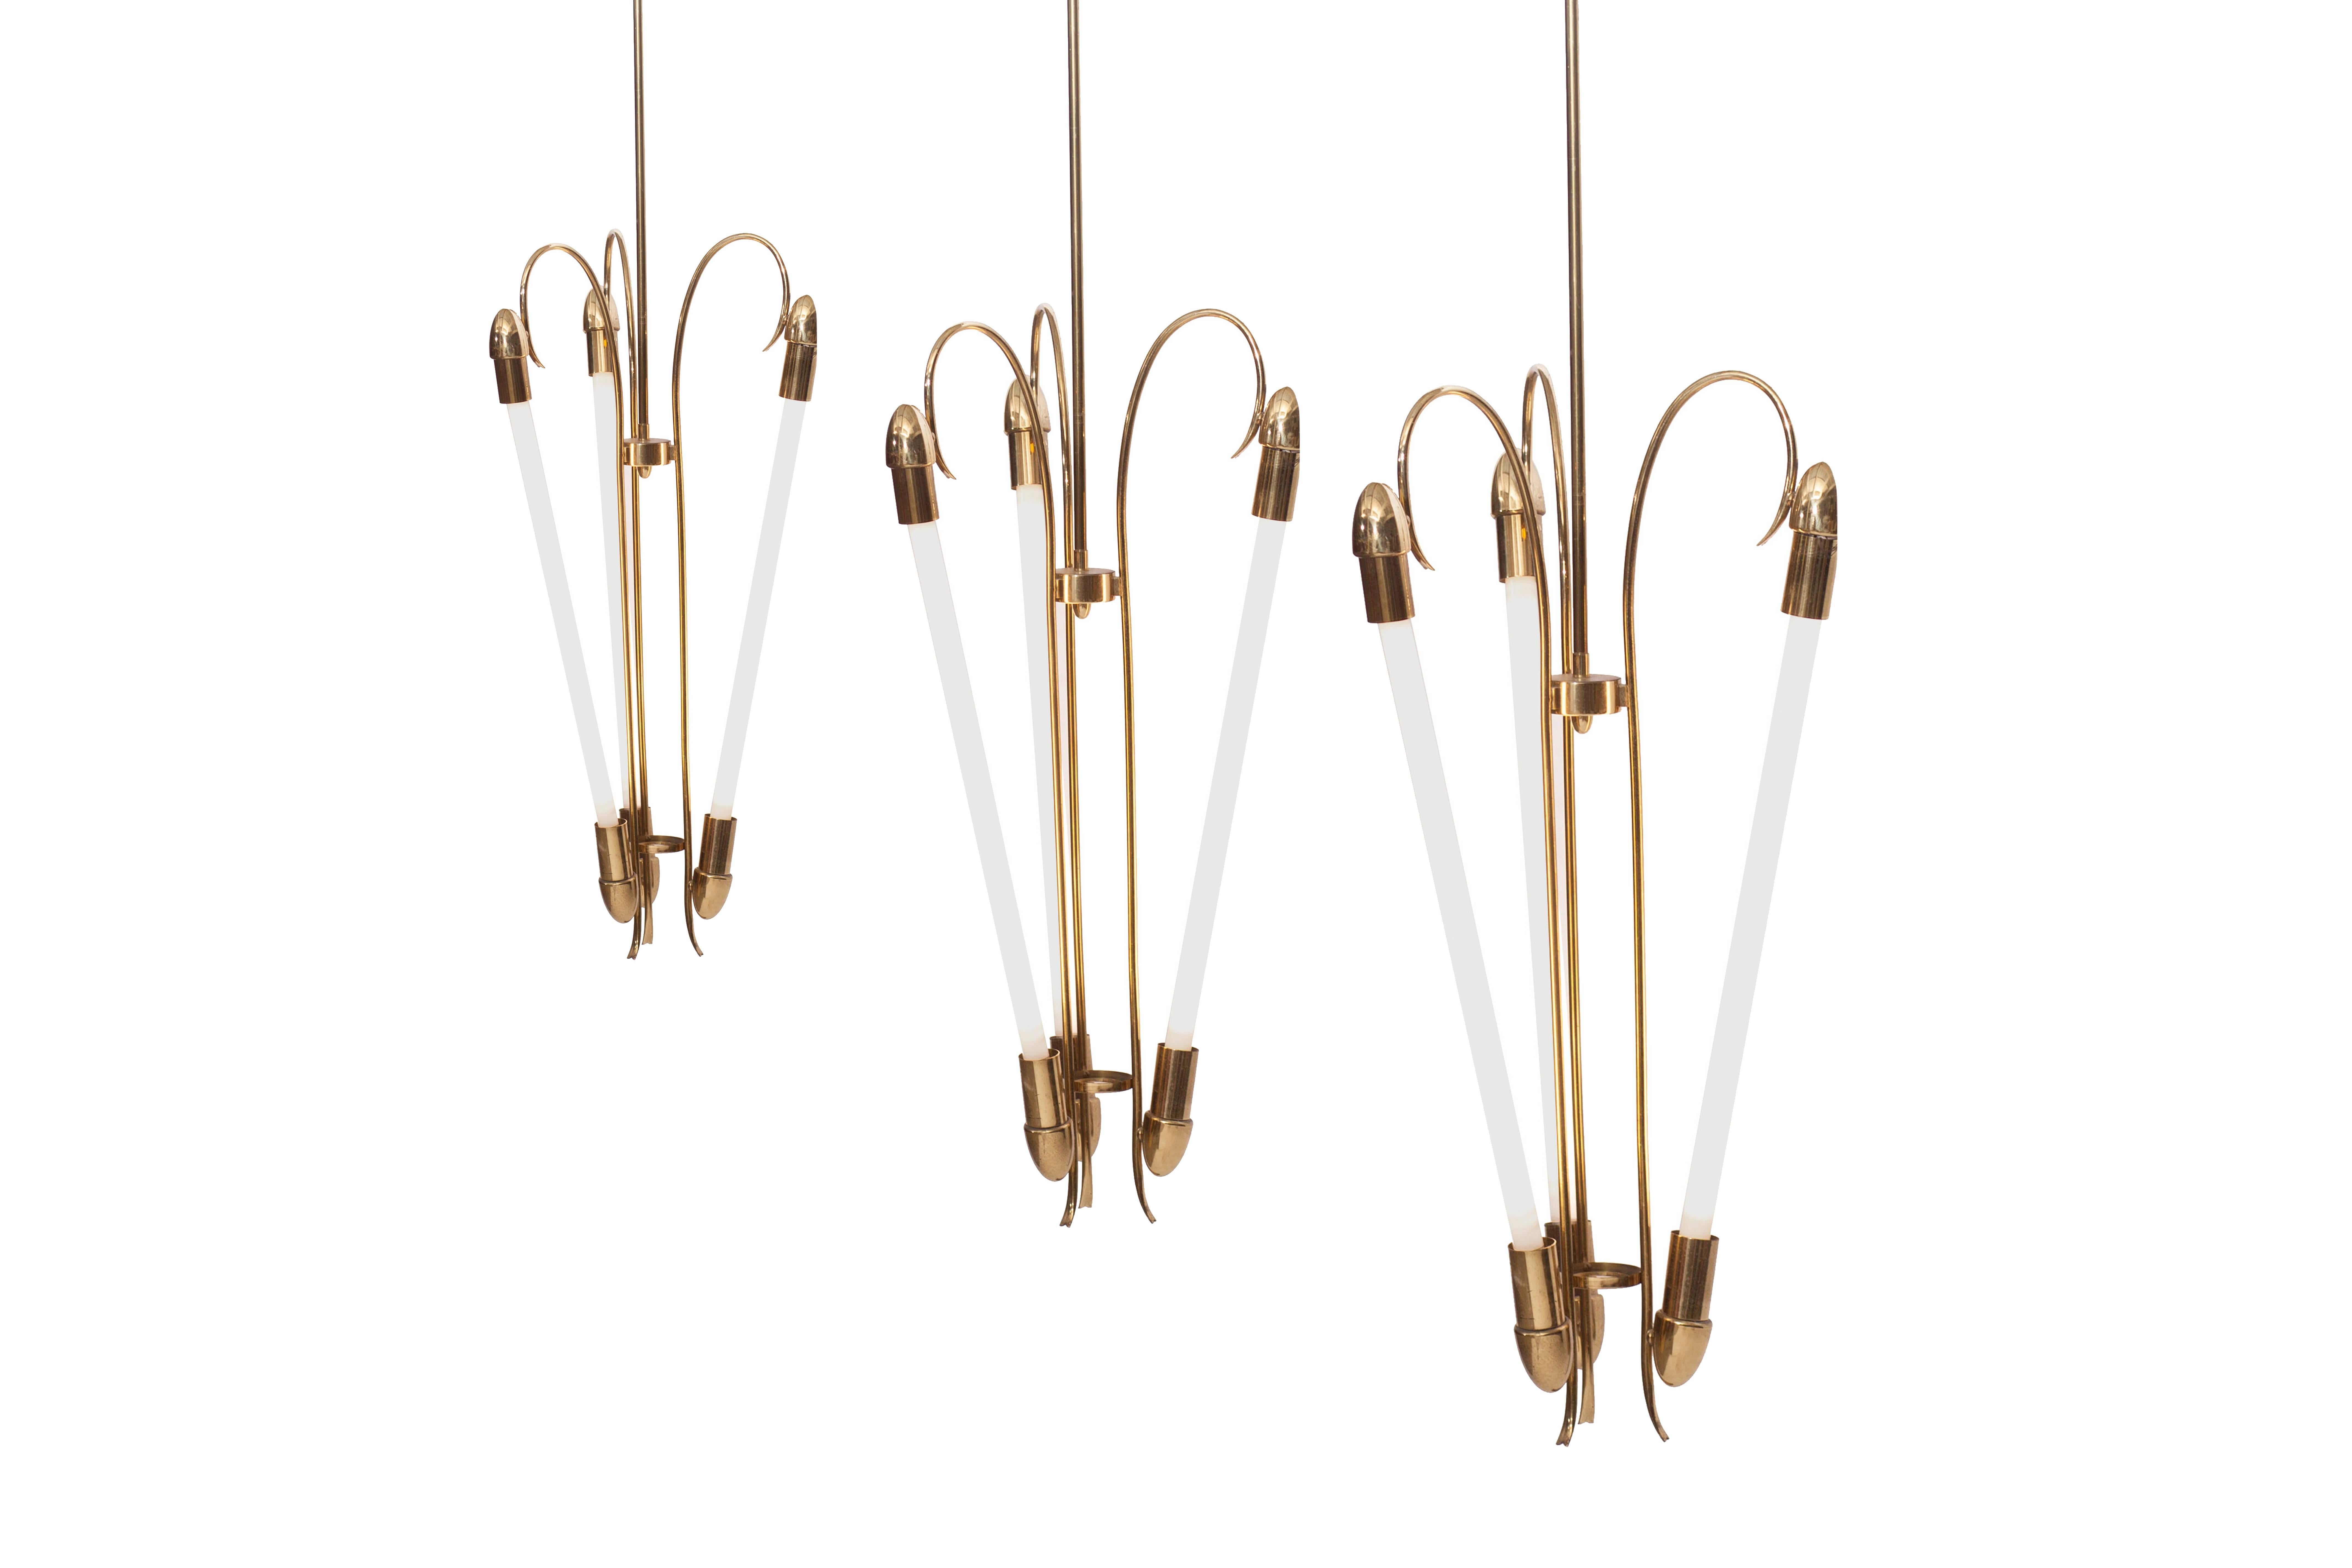 Regency brass chandelier by Kaiser & Co, made in Germany, circa the 1940s. 

Three fluorescent tube lights.

In the fashion of Art Deco transitioning into modern and Bauhaus.

Measures: H 200 cm, Ø 46 cm

We have three pieces available,